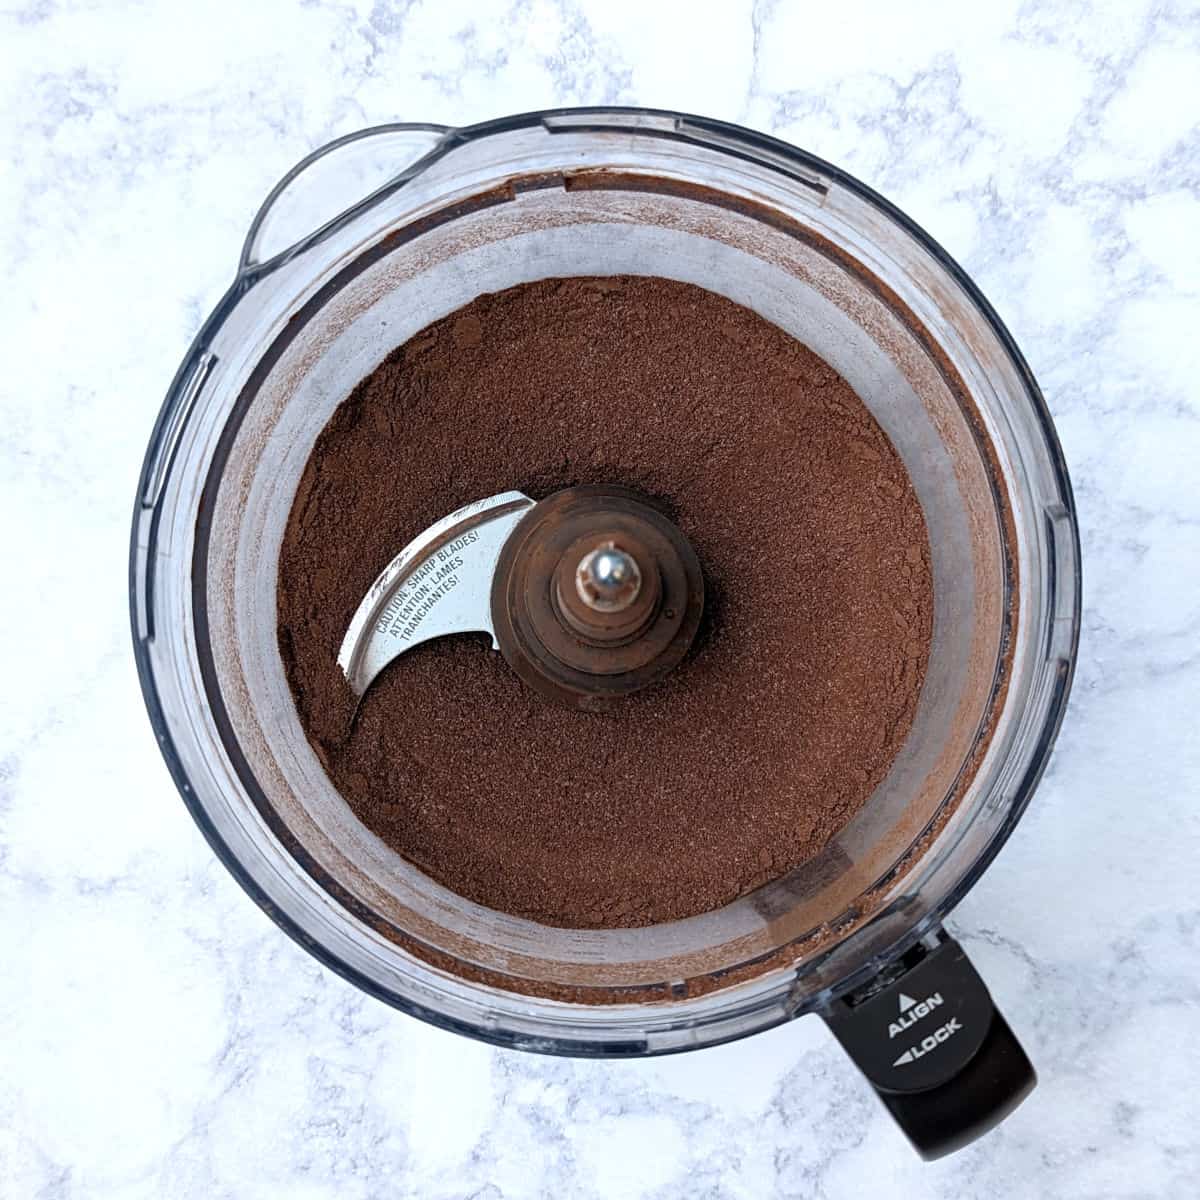 ingredients for hot chocolate mix, blended together in a food processor bowl